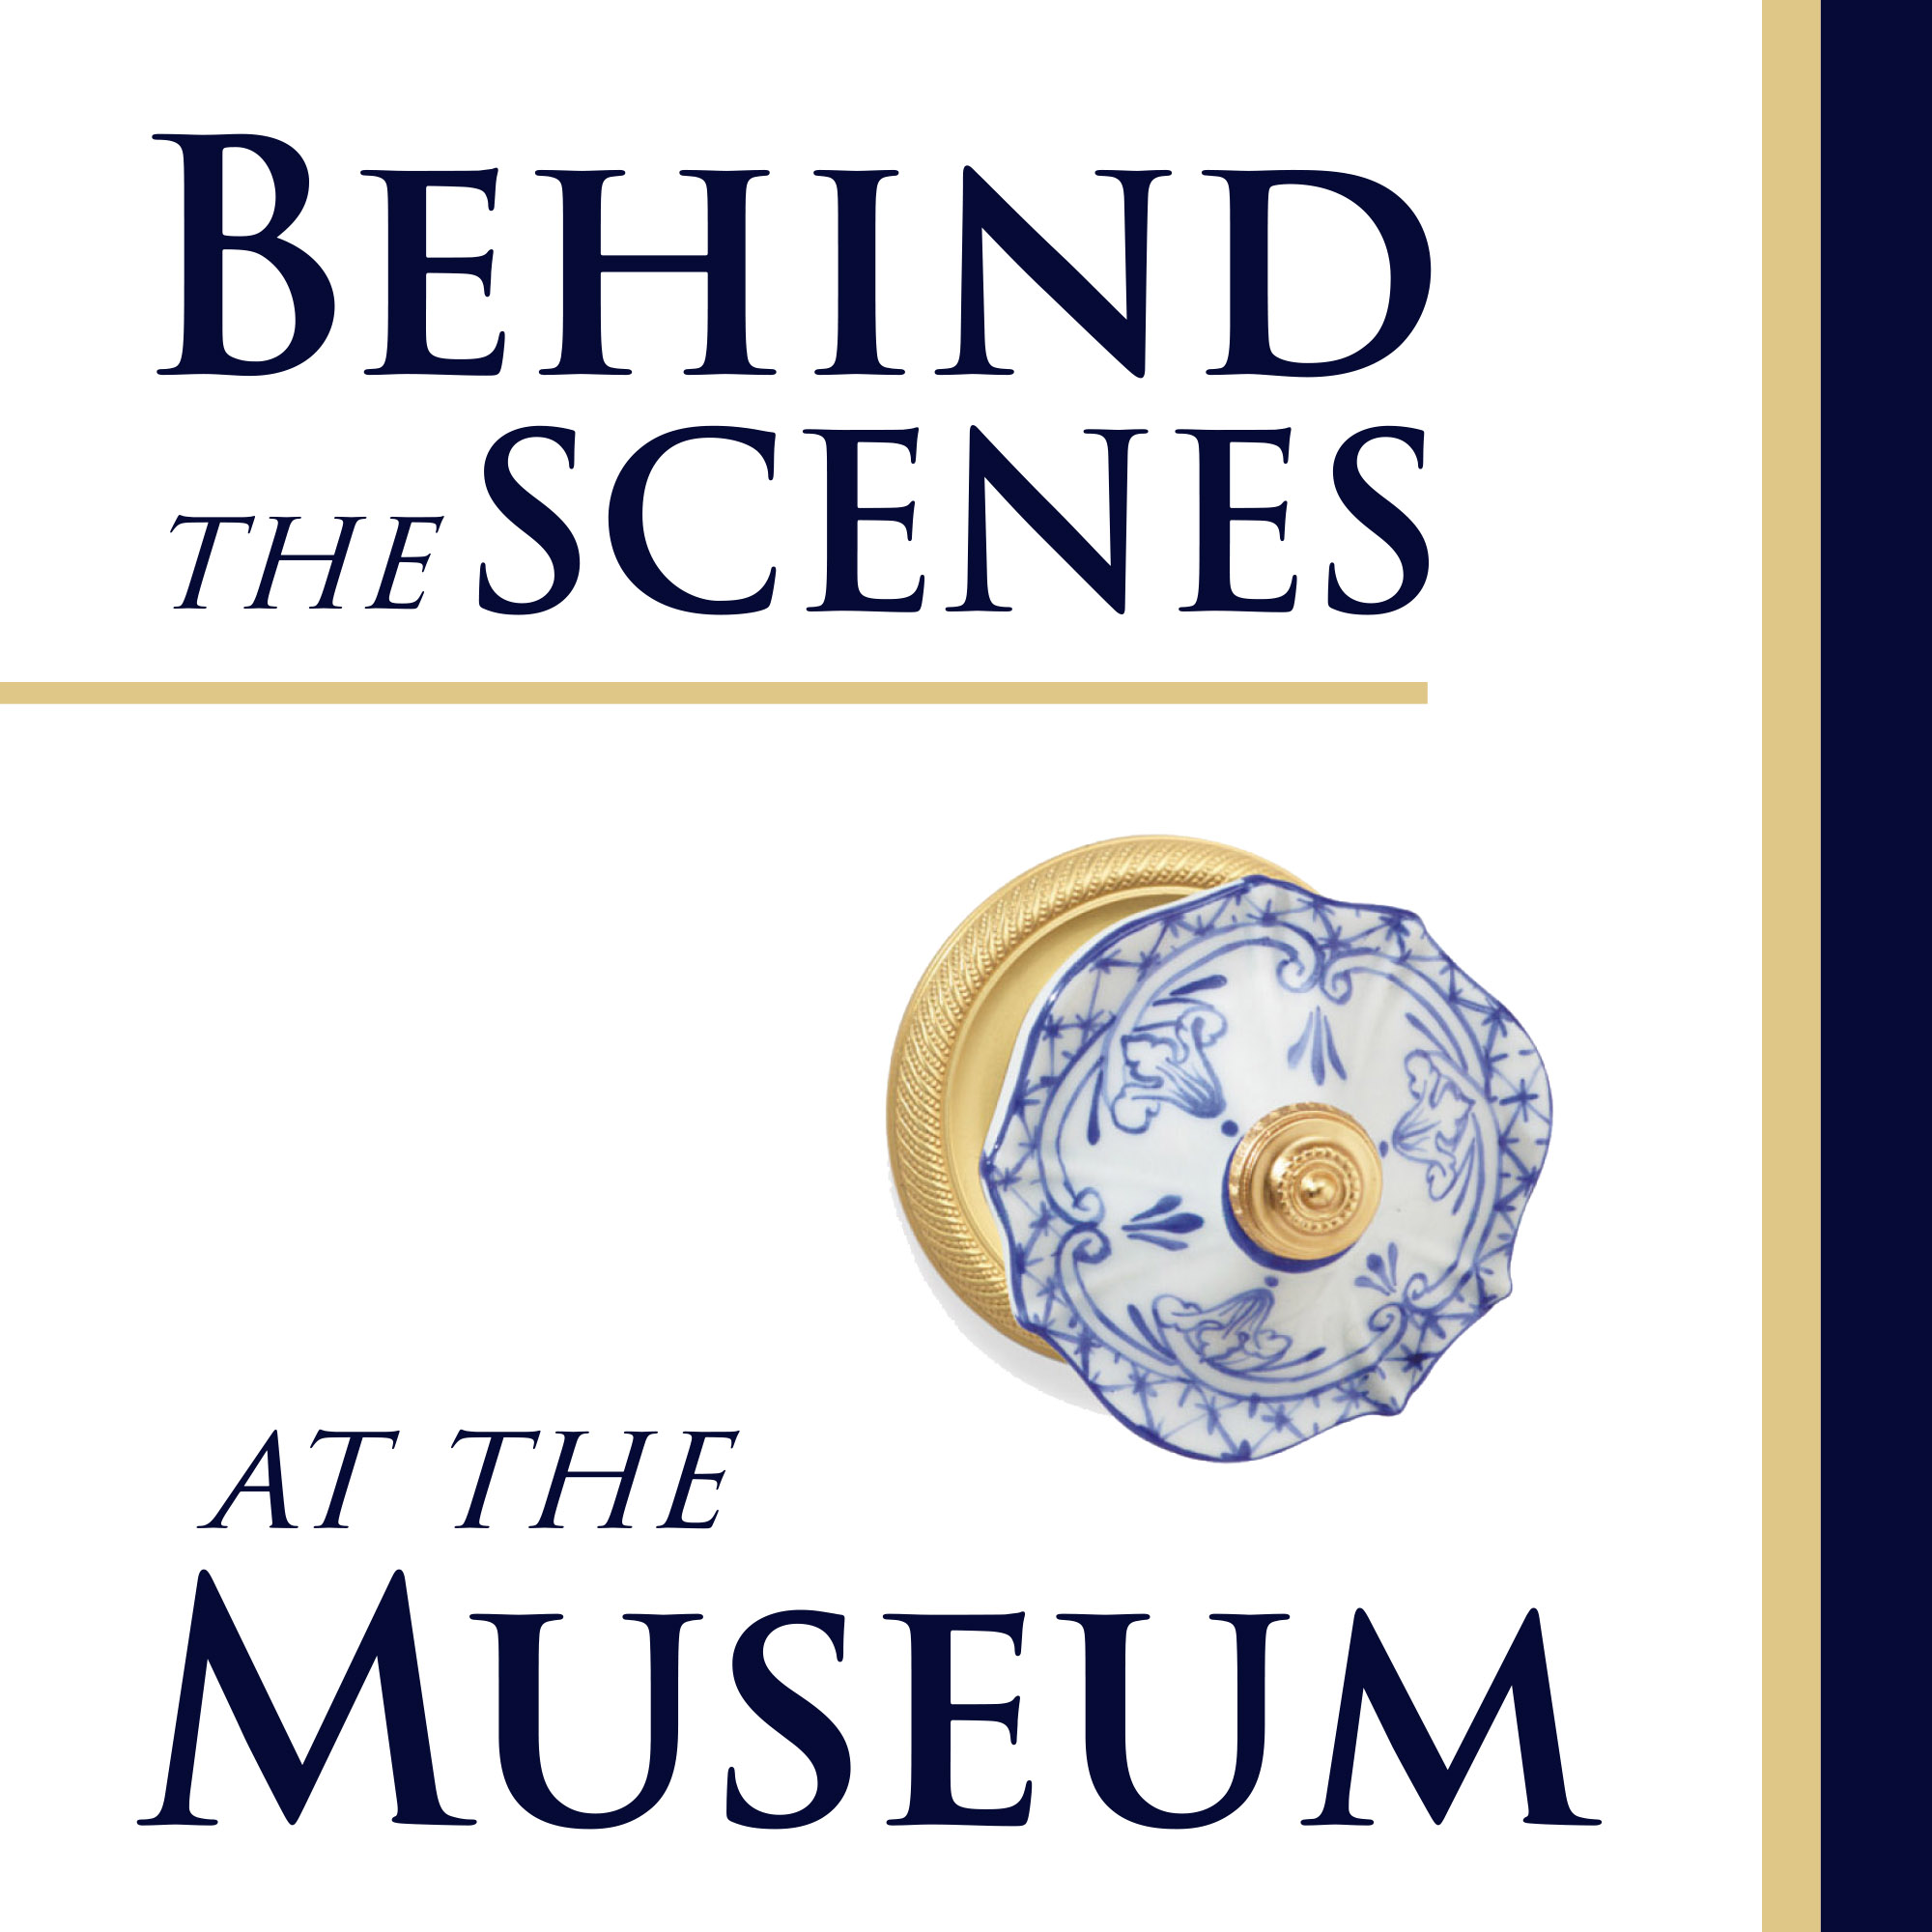 Artwork for Behind the Scenes at the Museum